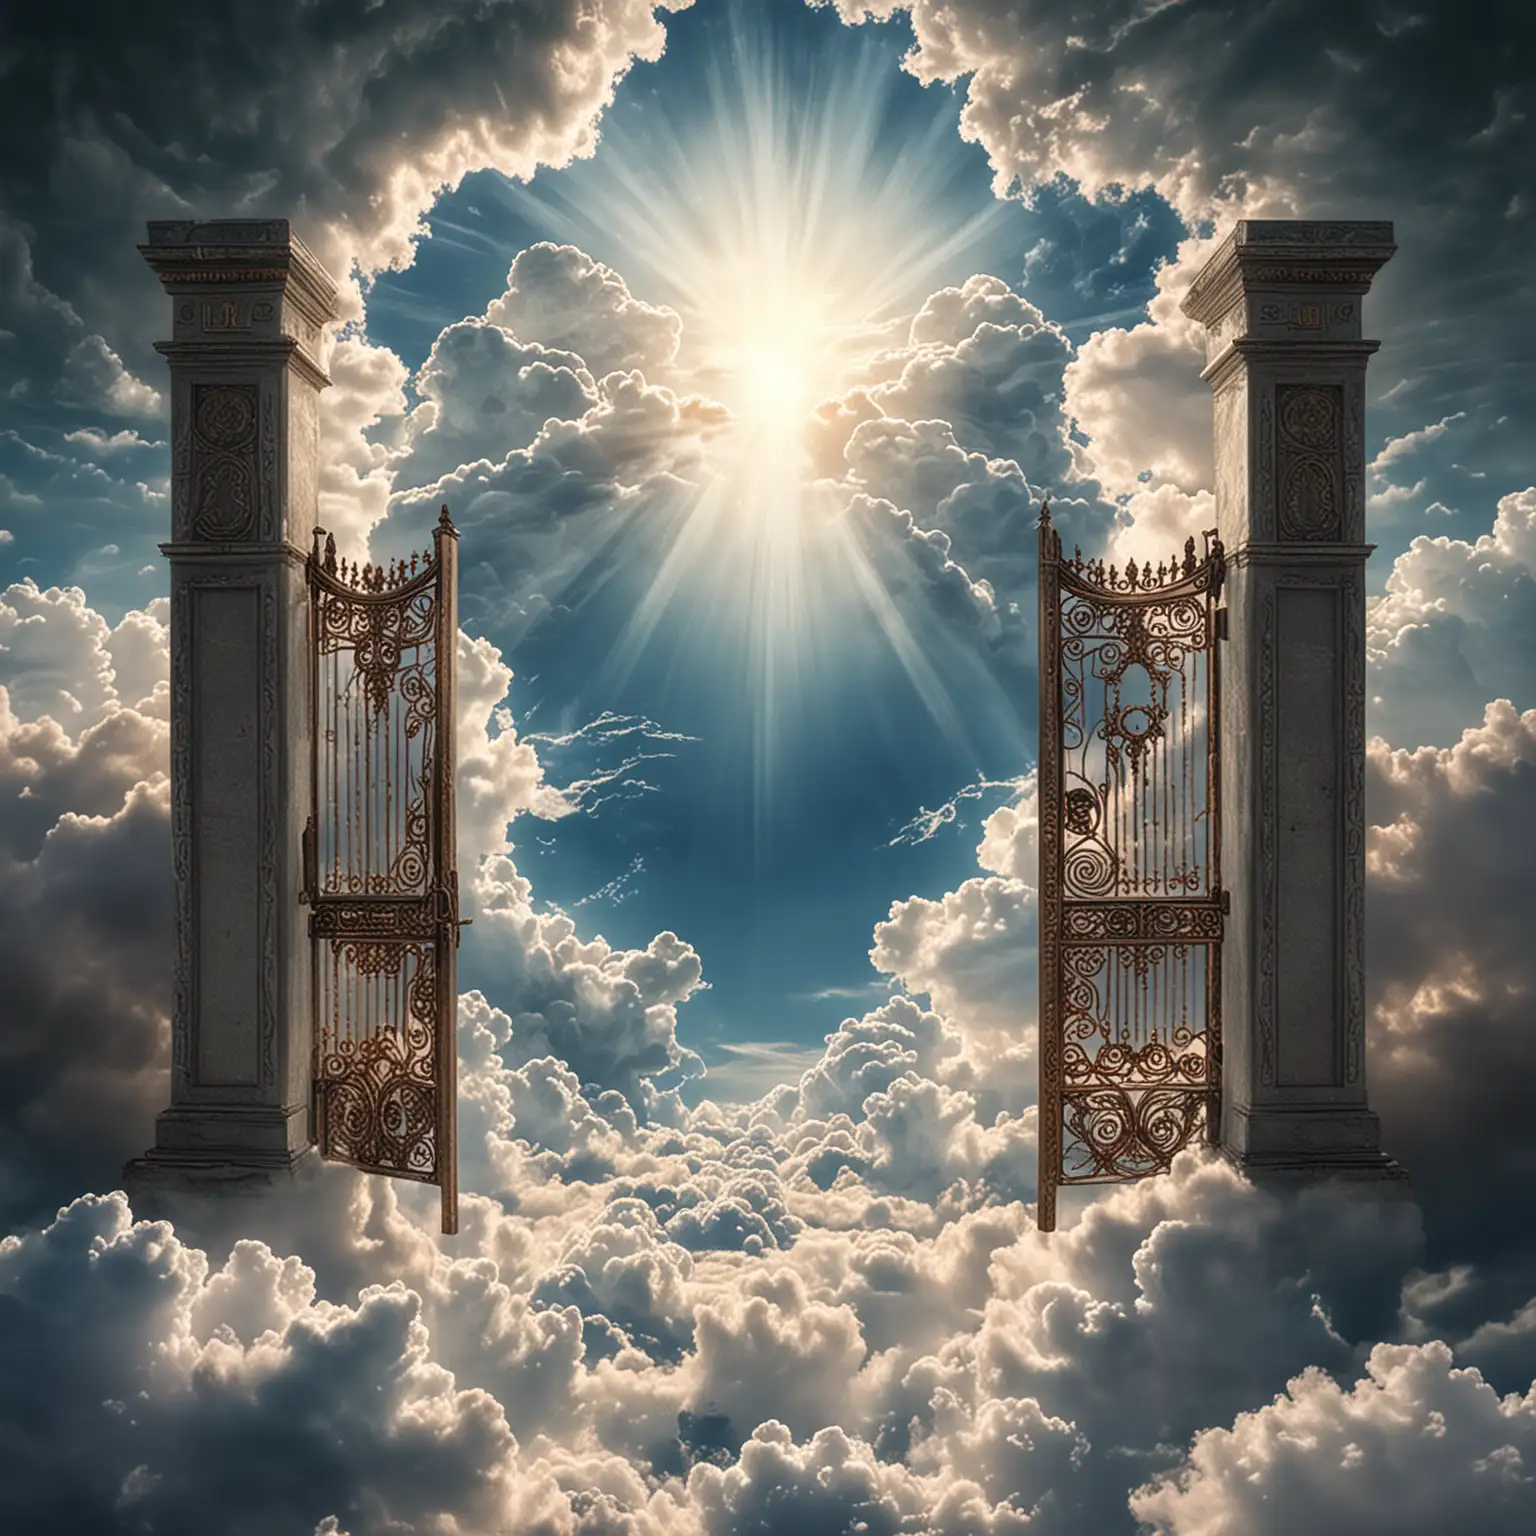 Majestic Gate of Heaven Emerging from Clouds